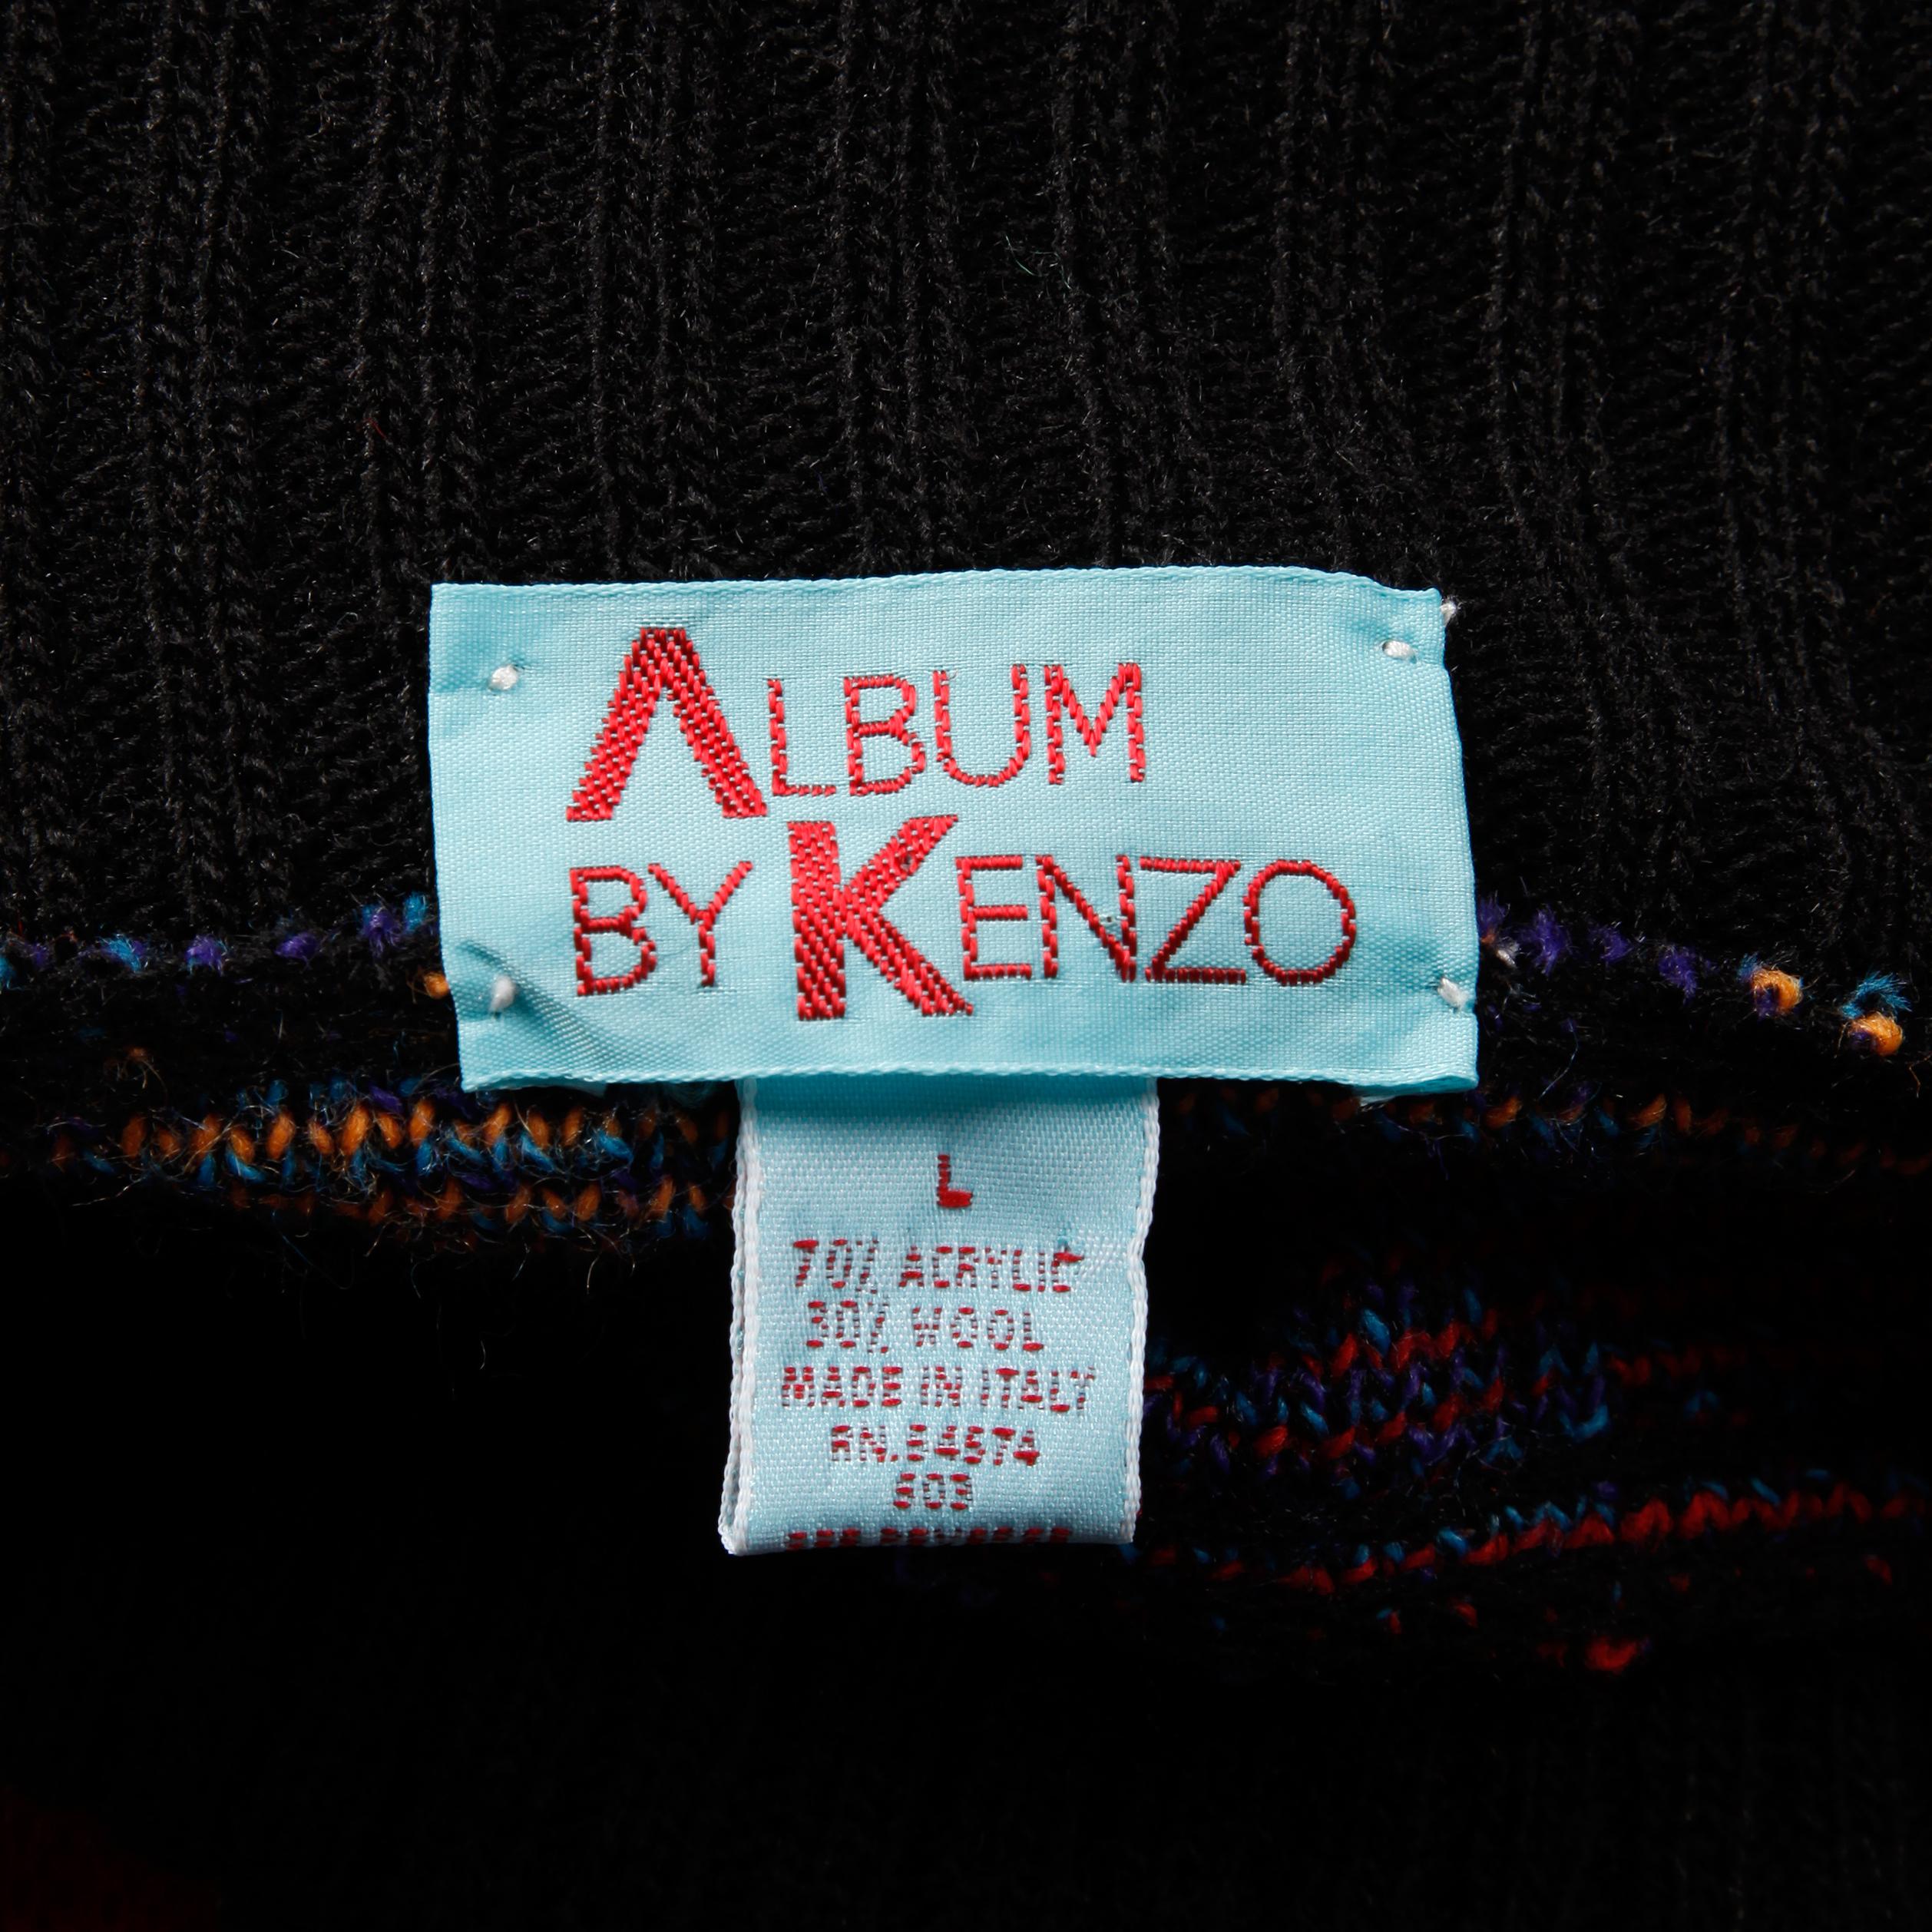 Vintage 1980s knit pullover sweater or jumper by Kenzo with colorful checkers and stripes. Unlined with no closure (pulls on over the head). The marked size is large. 70% acrylic, 30% wool. The bust measures 55